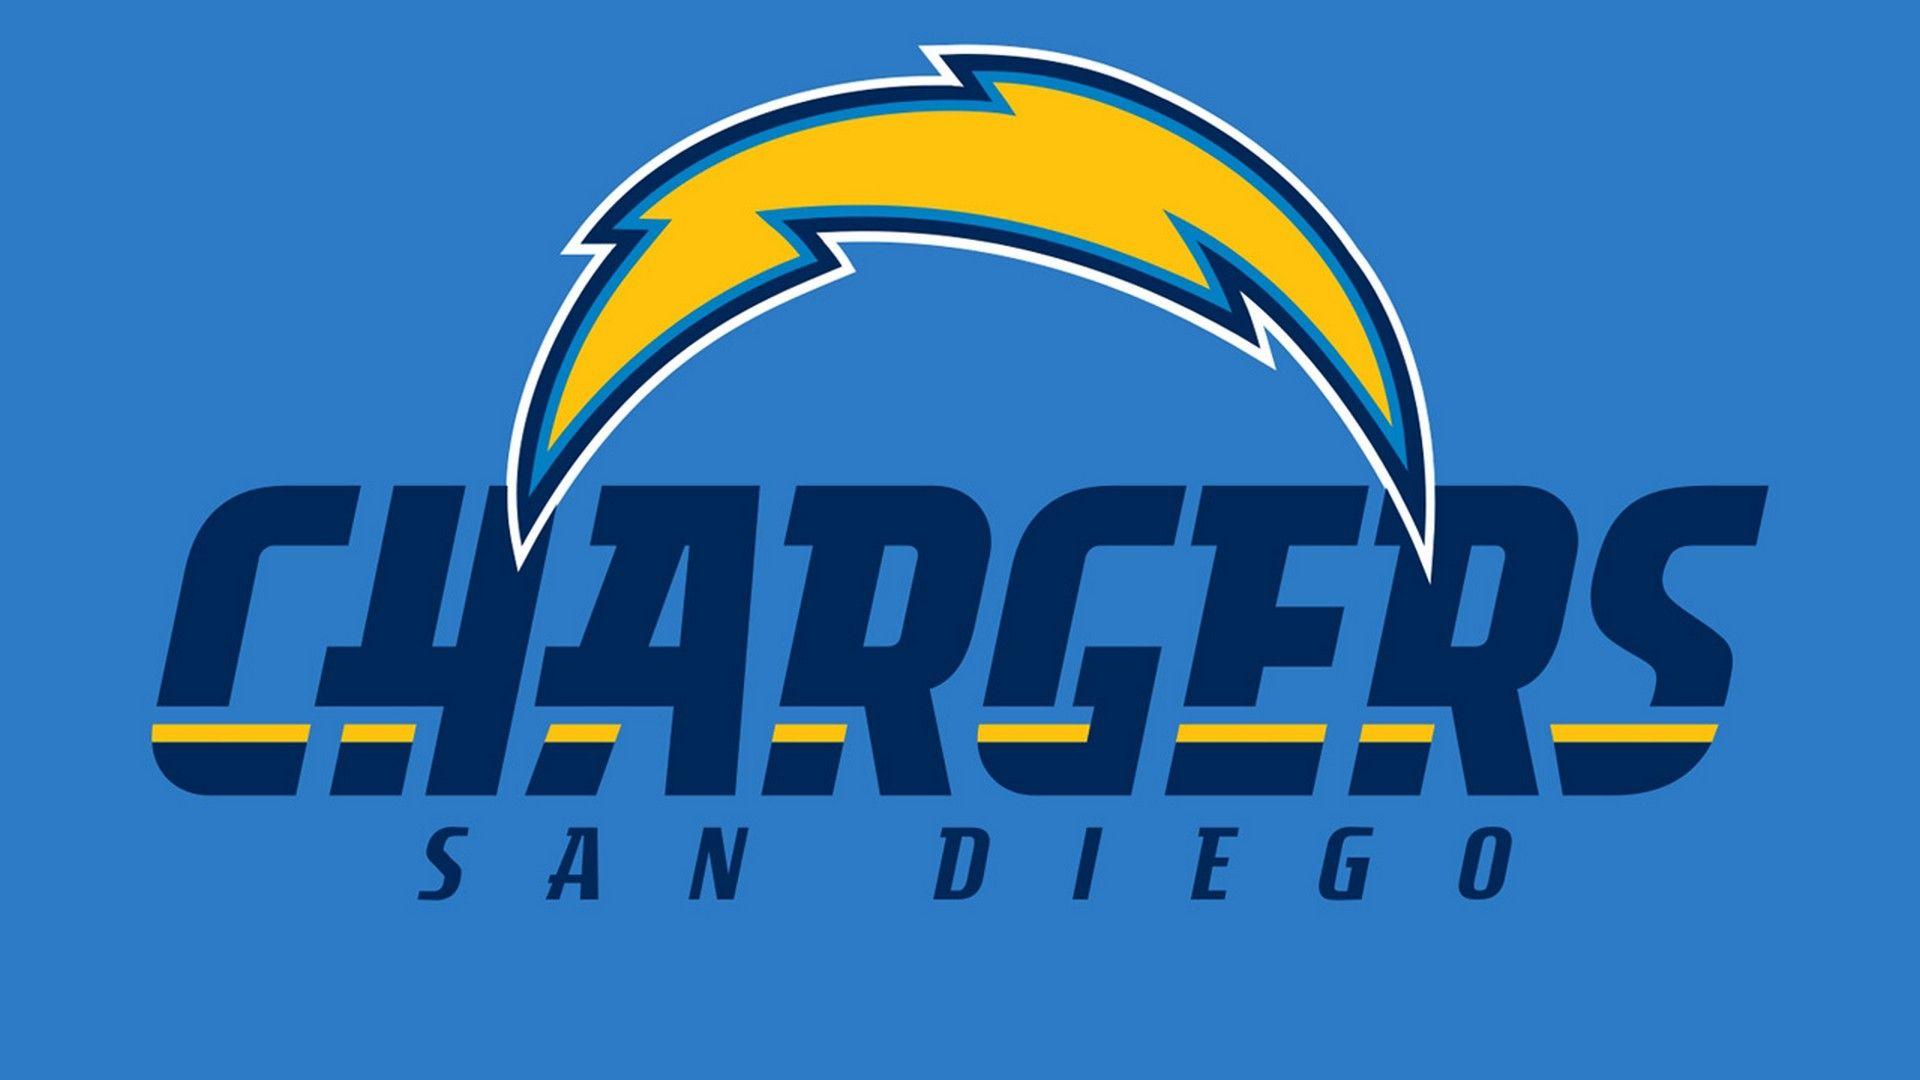 Los Angeles Chargers HD Wallpaper NFL Football Wallpaper